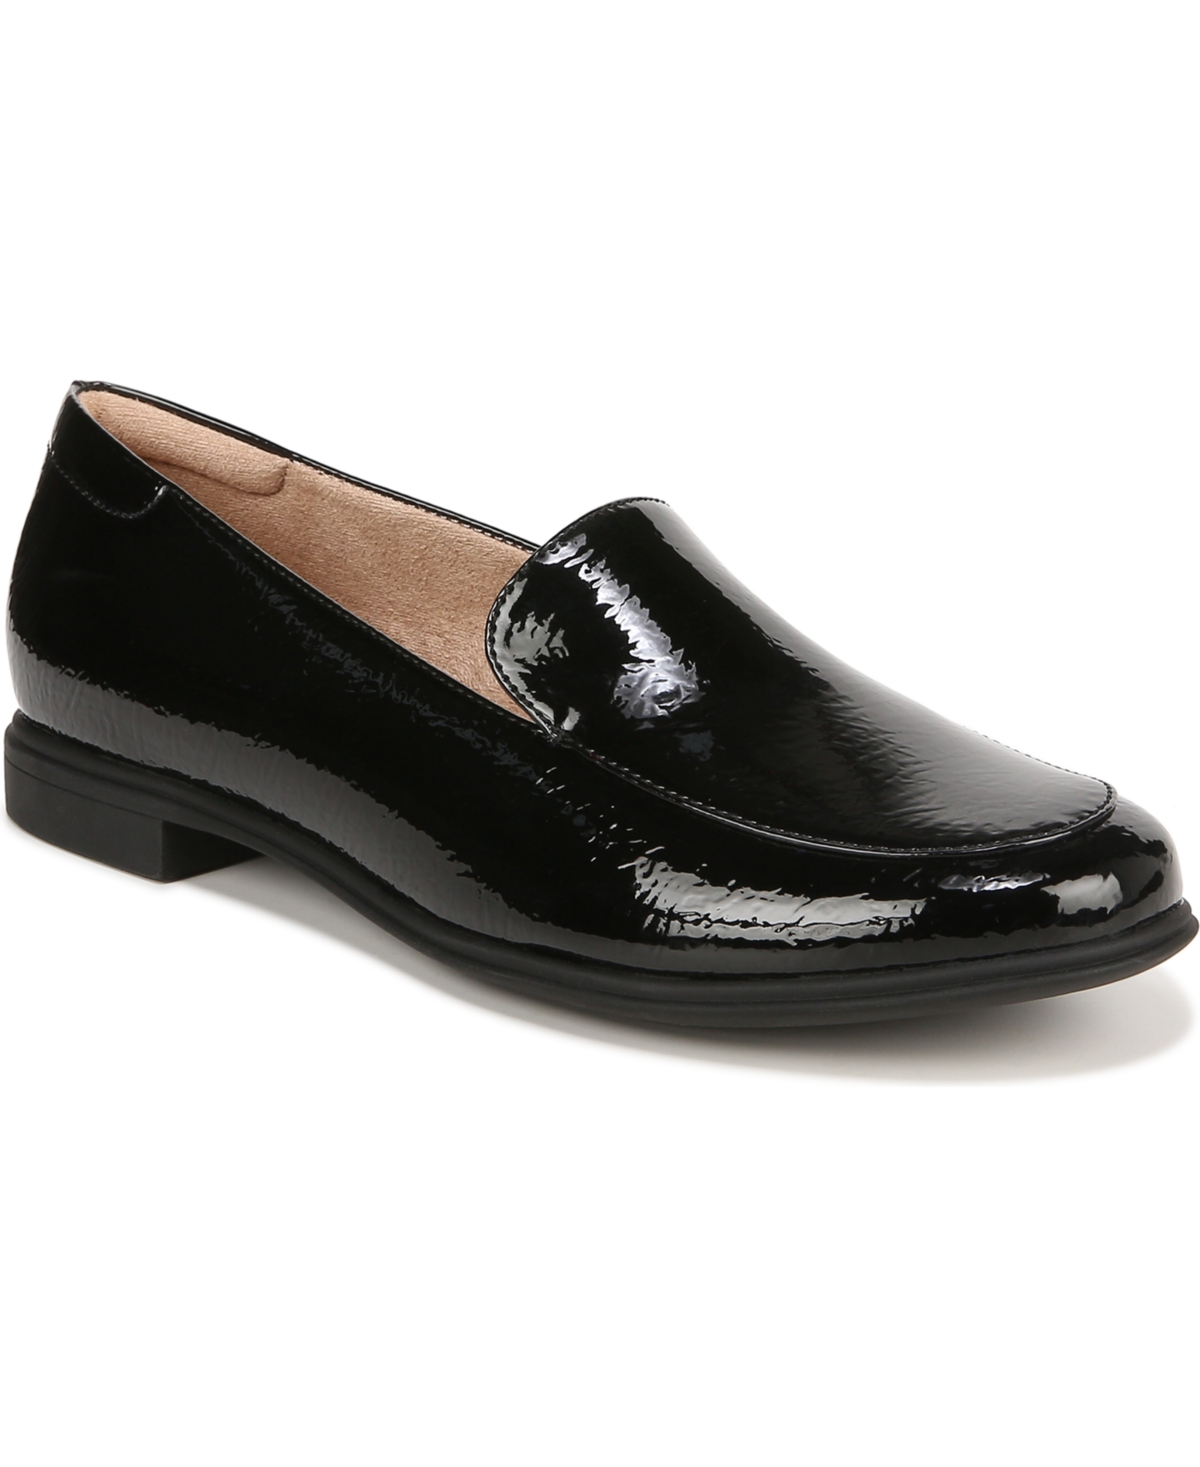 Luv Loafers - Dark Taupe Patent Faux Patent